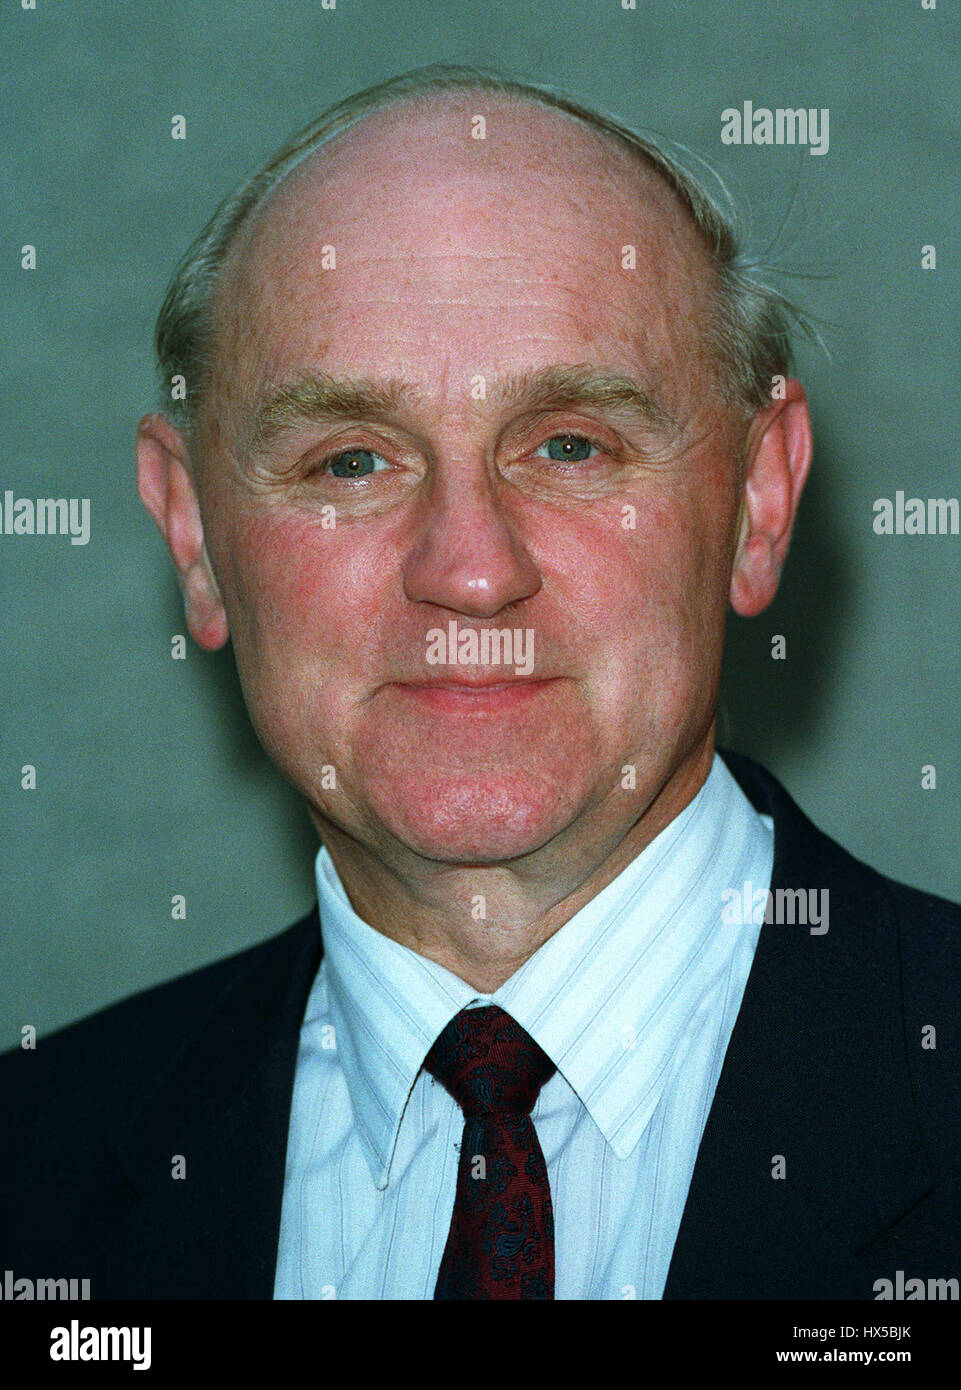 TED ROWLANDS MP LABOUR PARTY MERTHYR TYDFIL 26 October 1994 Stock Photo